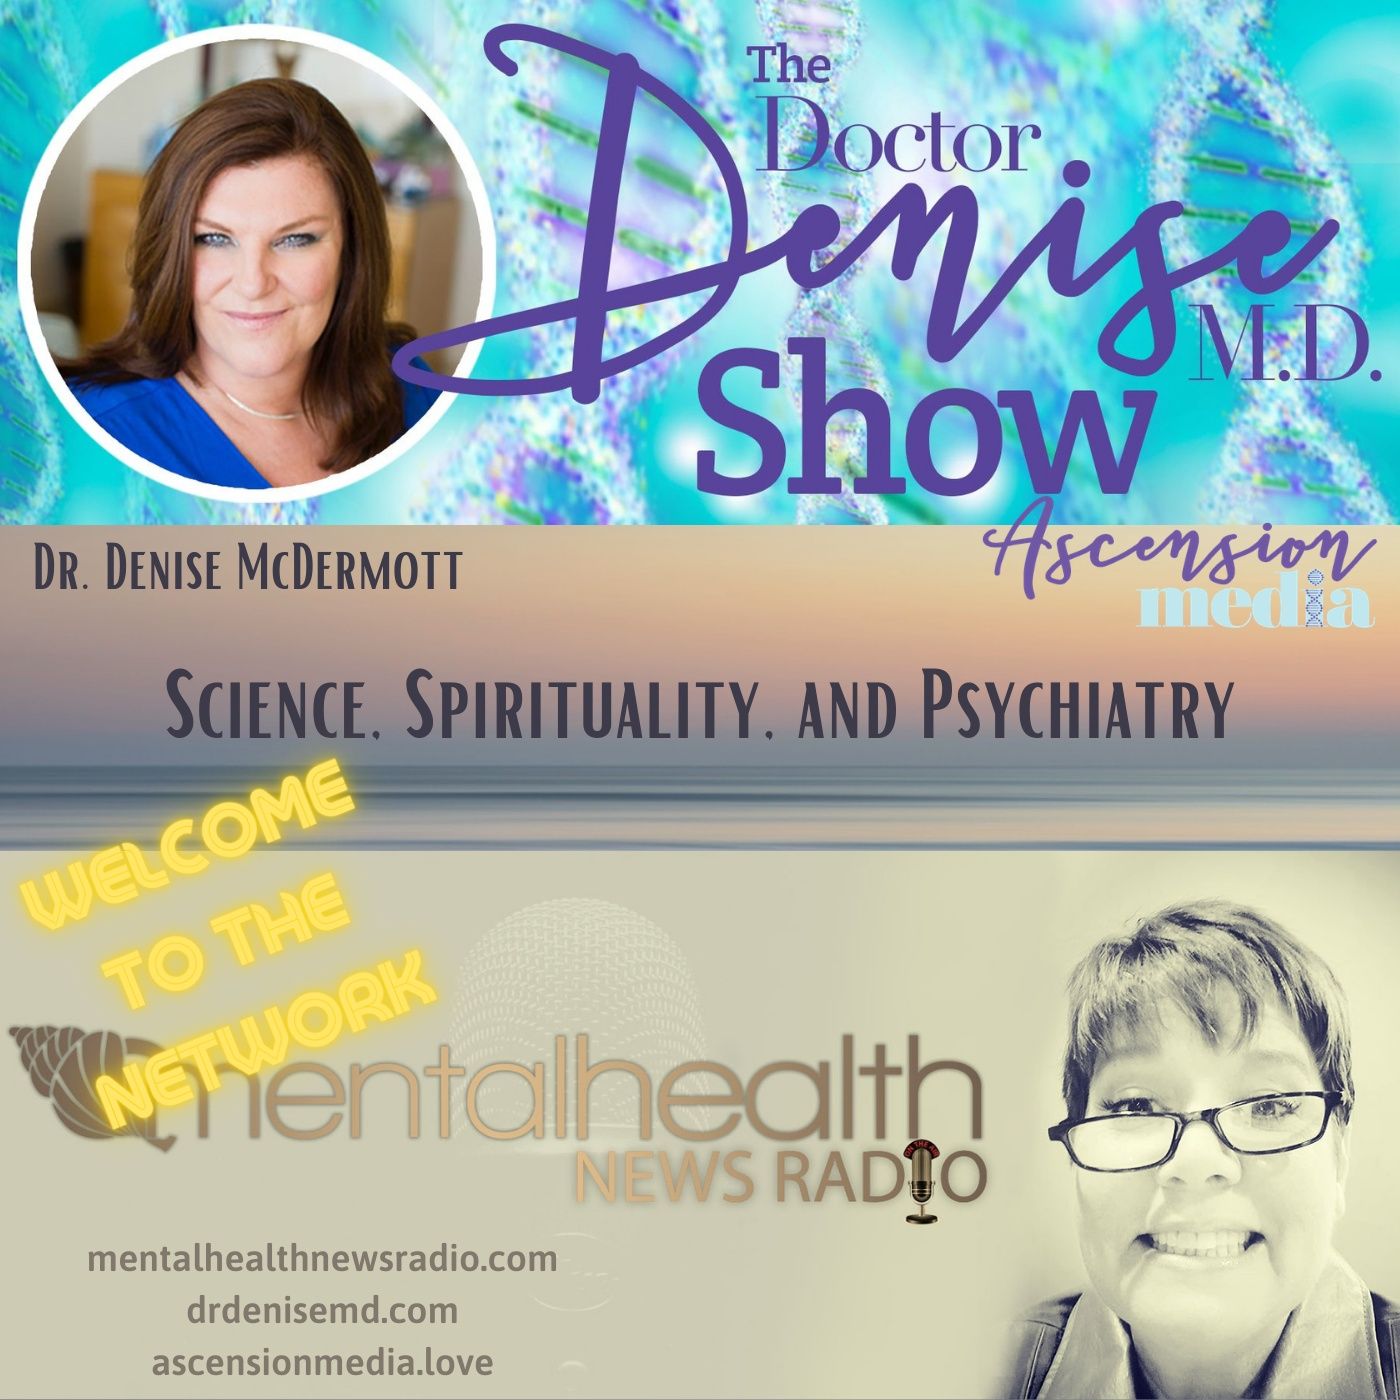 Mental Health News Radio - Science, Spirituality and Psychiatry with Dr. Denise McDermott